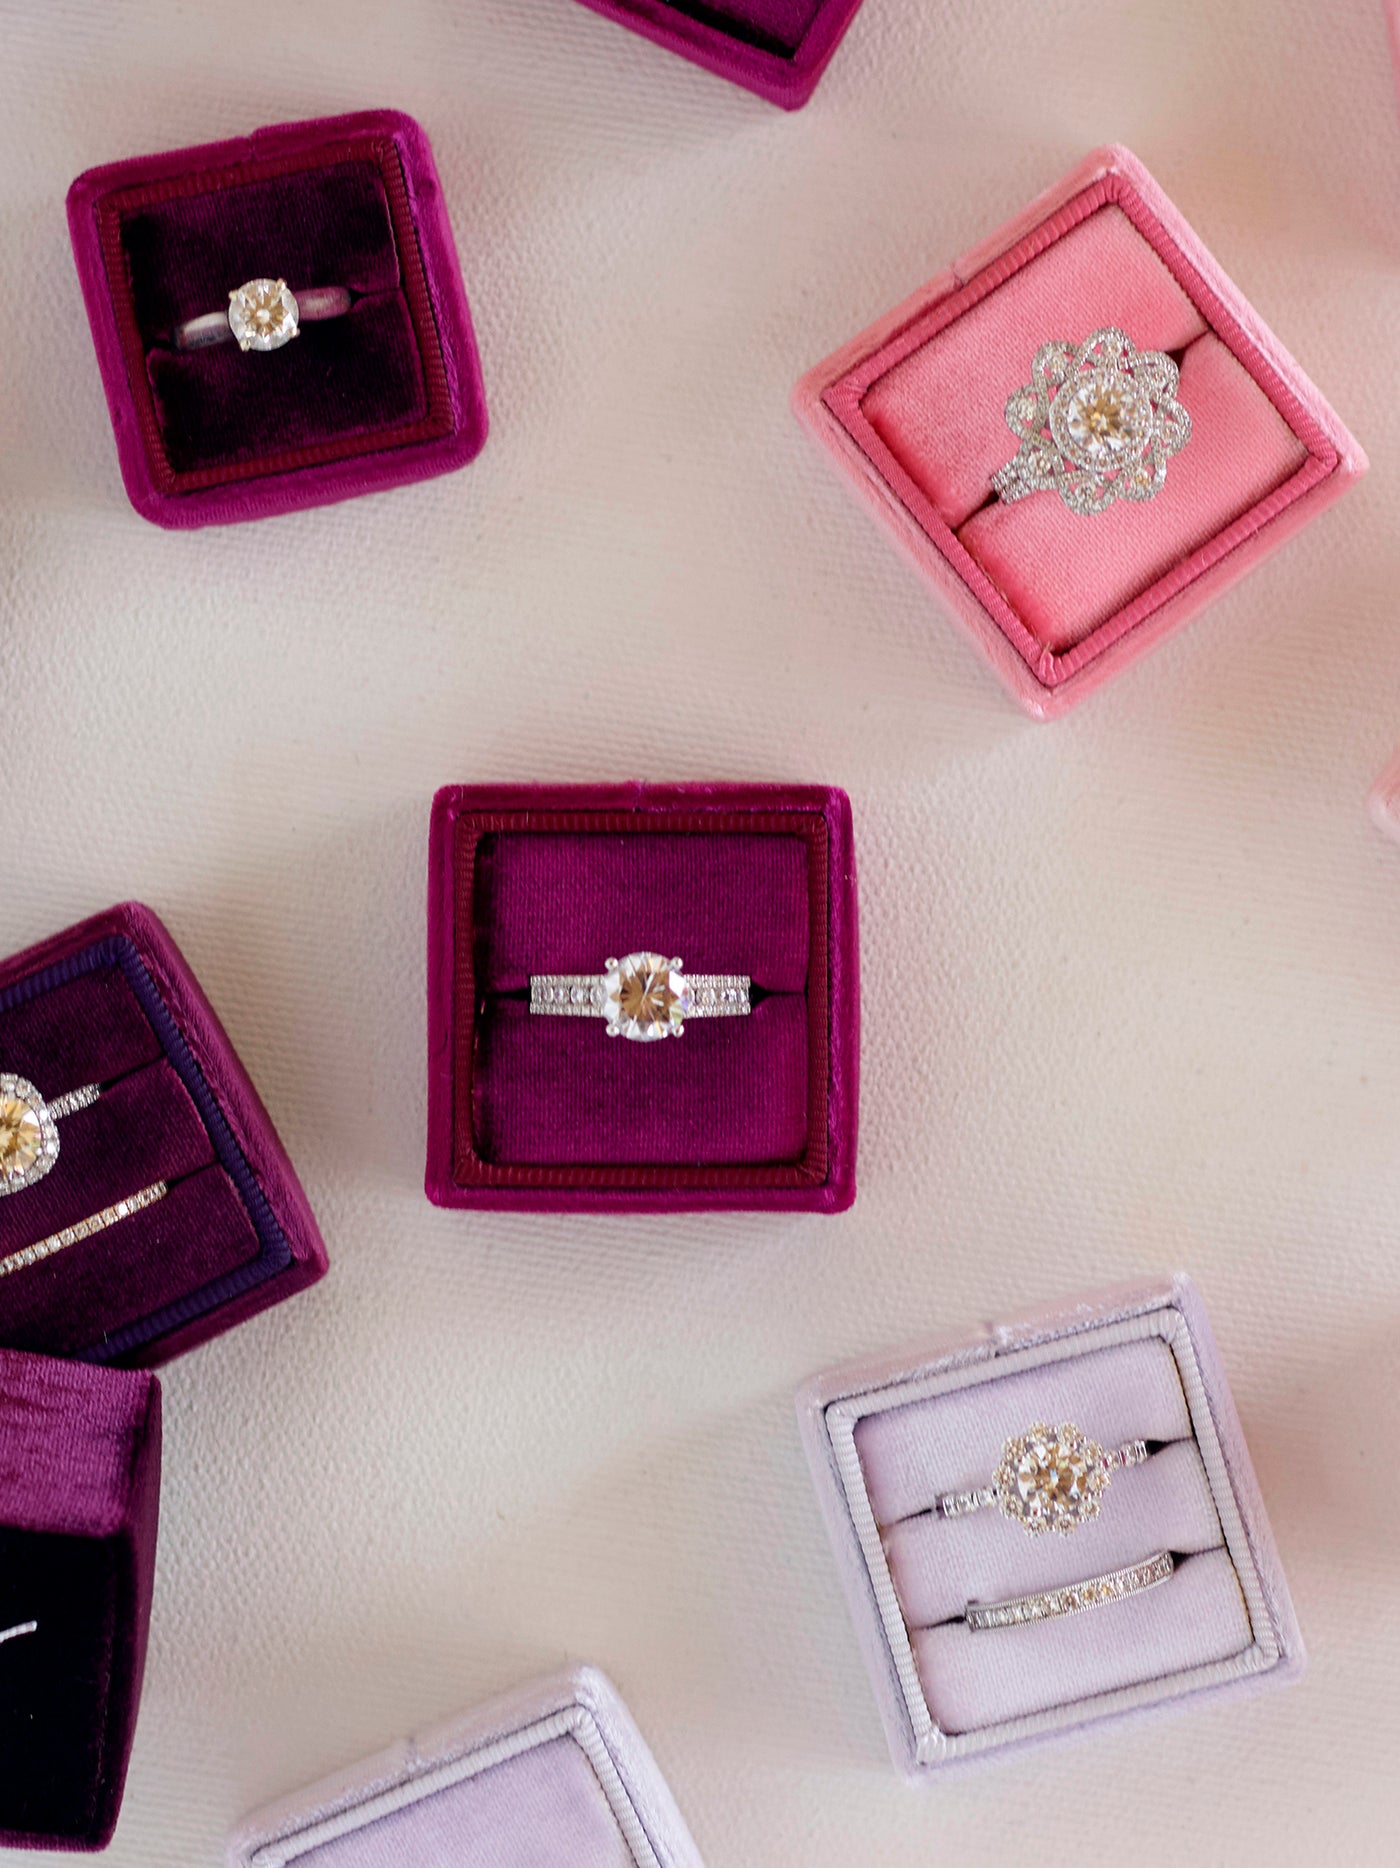 colorful wedding ring boxes for proposals